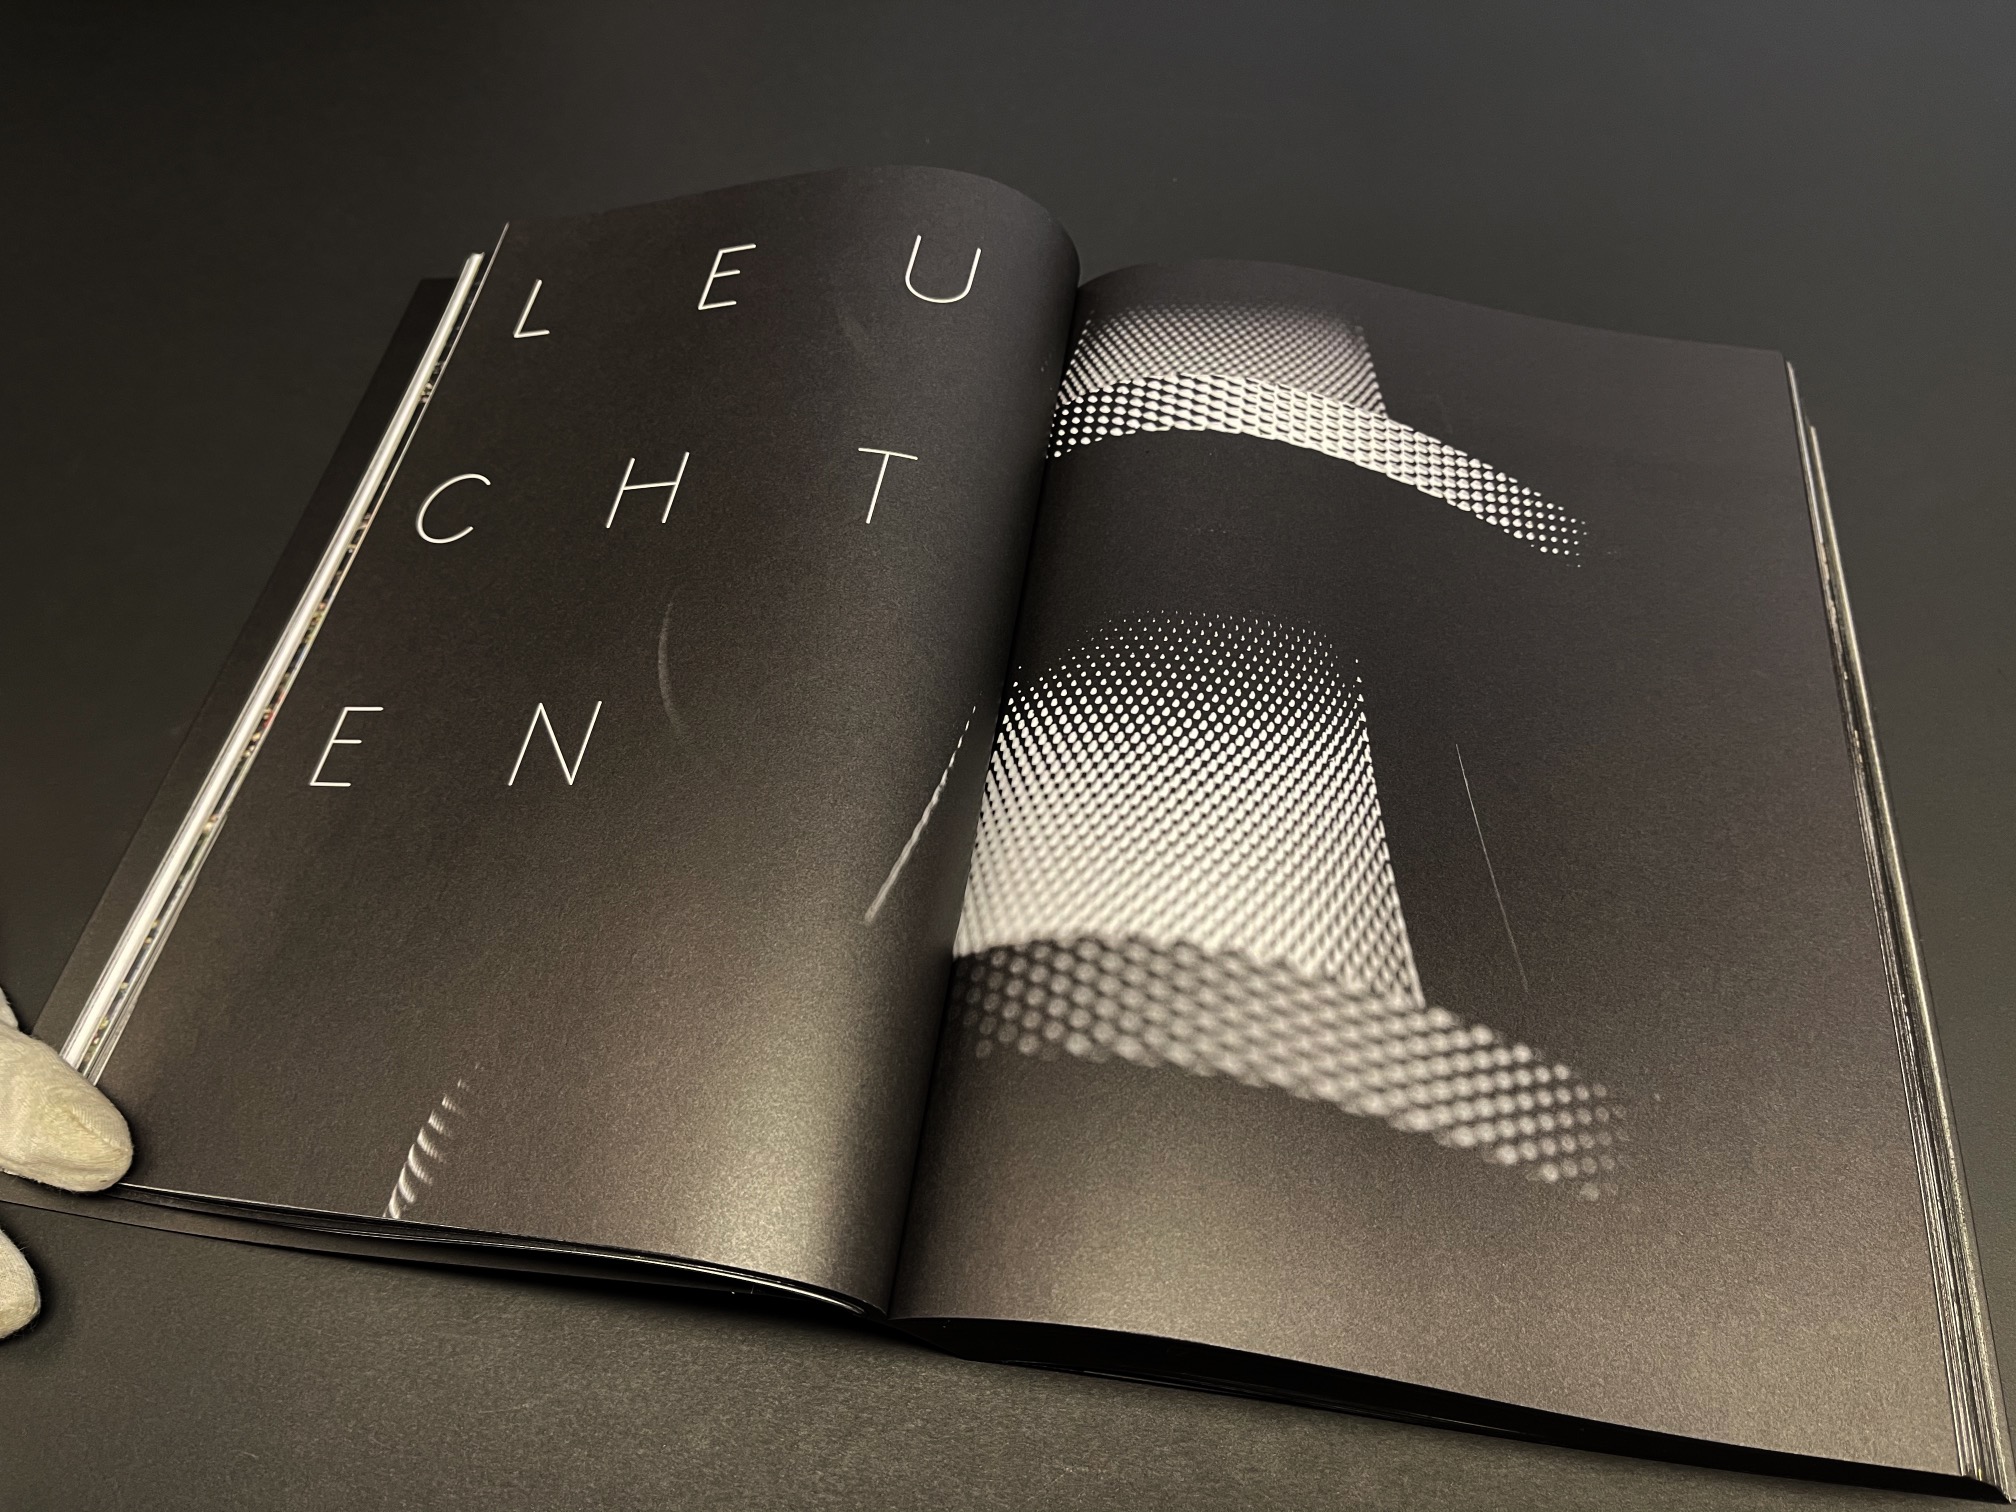 An image of Selux Imagebook, showcasing a double page spread of the opening chapter on Luminaires.